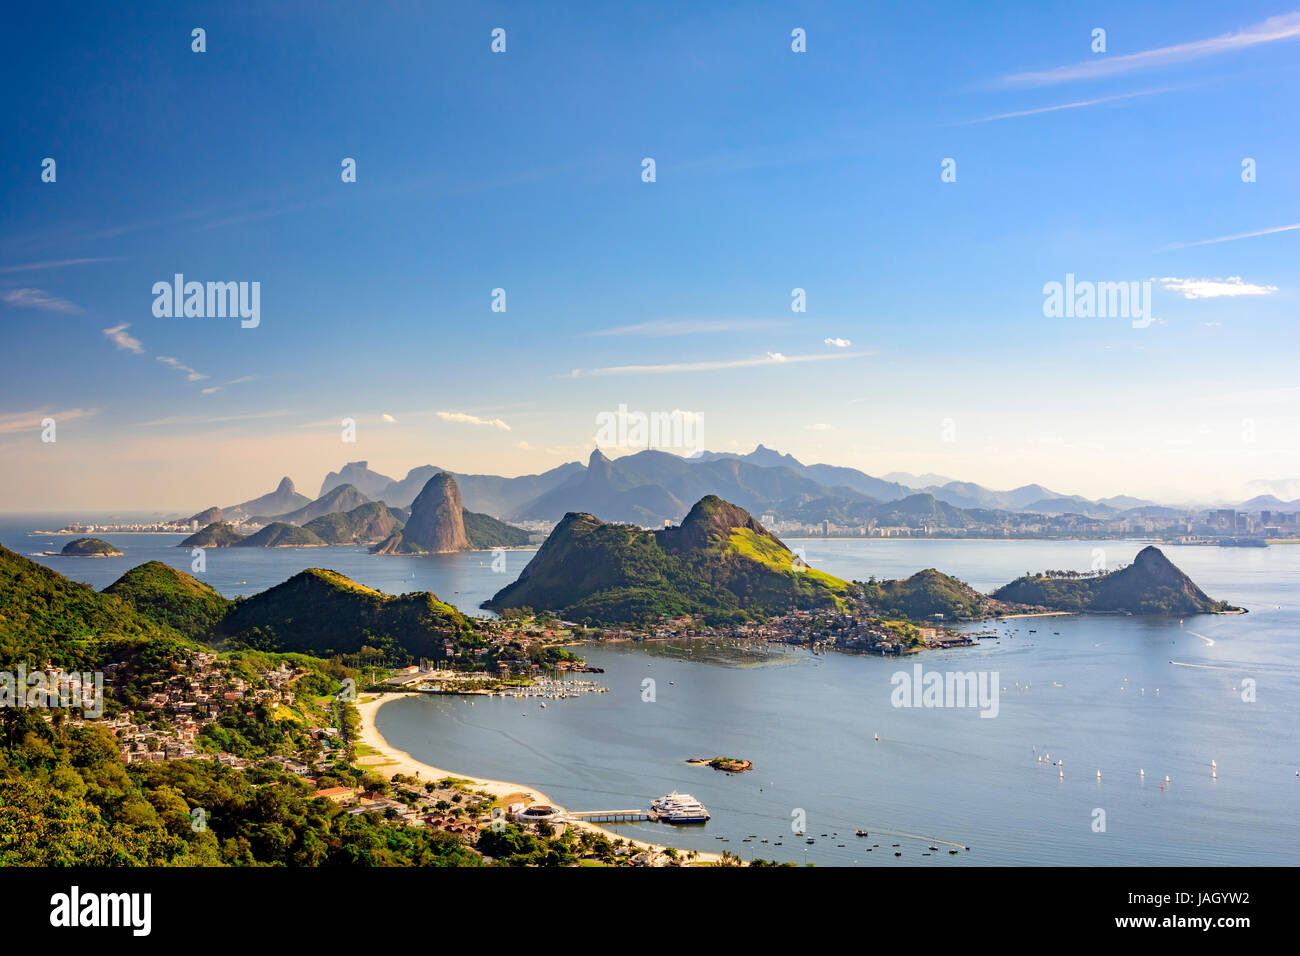 View of Guanabara Bay, Sugar Loaf and hills of Rio de Janeiro from the City Park in Niteroi Stock Photo